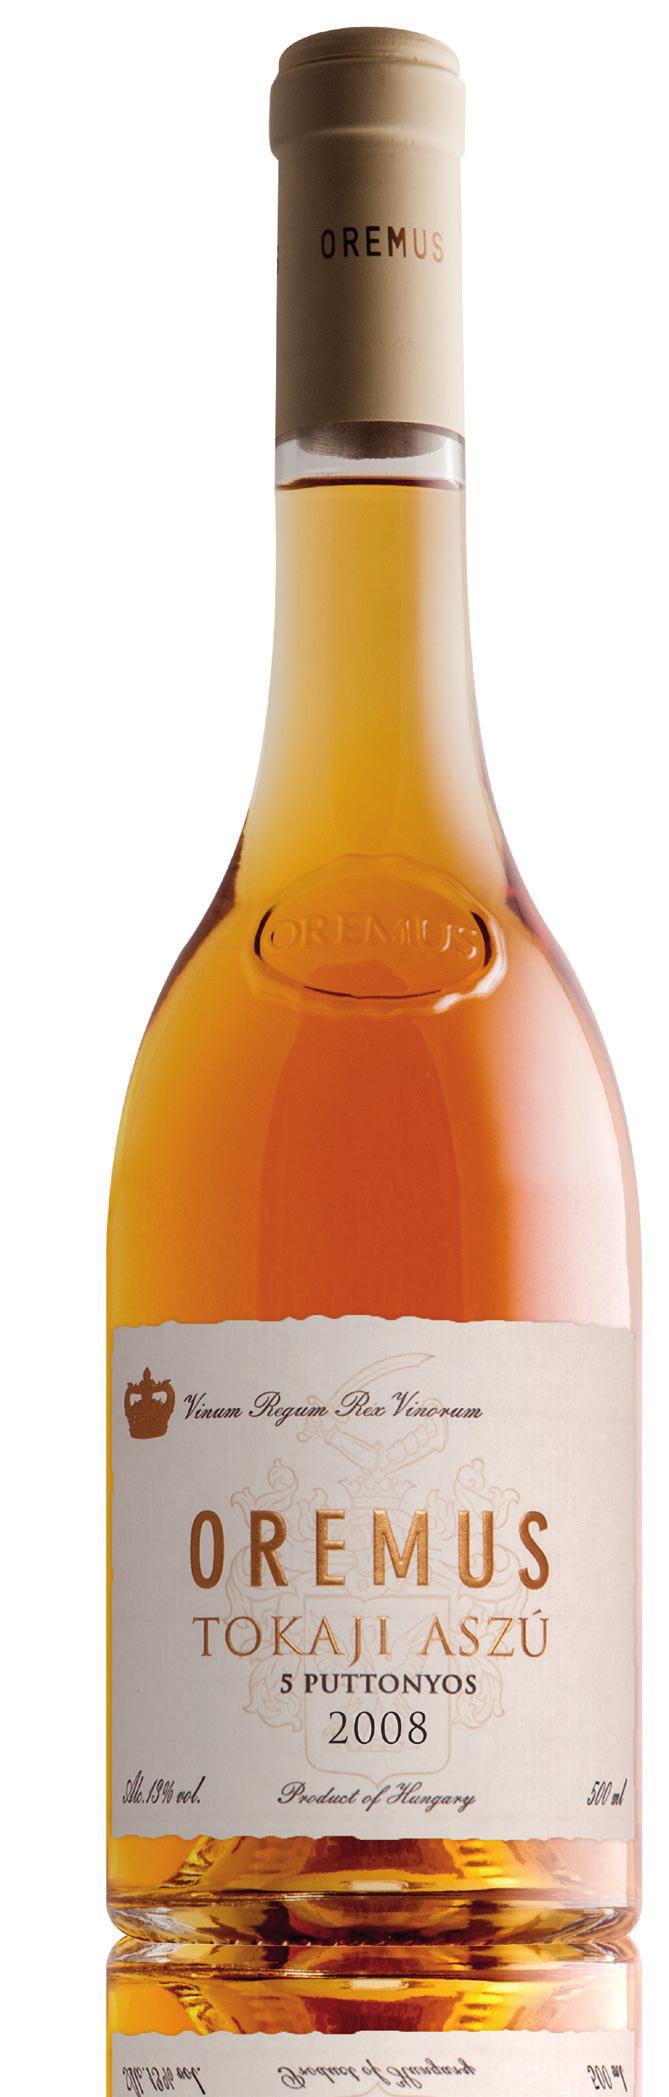 ASZÚ 5 PUTTONYOS 2008 The Tokaj legend has grown and grown in its four-hundred years of history; but it was not until 1630 that the greatness of the Oremus vineyard was first spoken of.